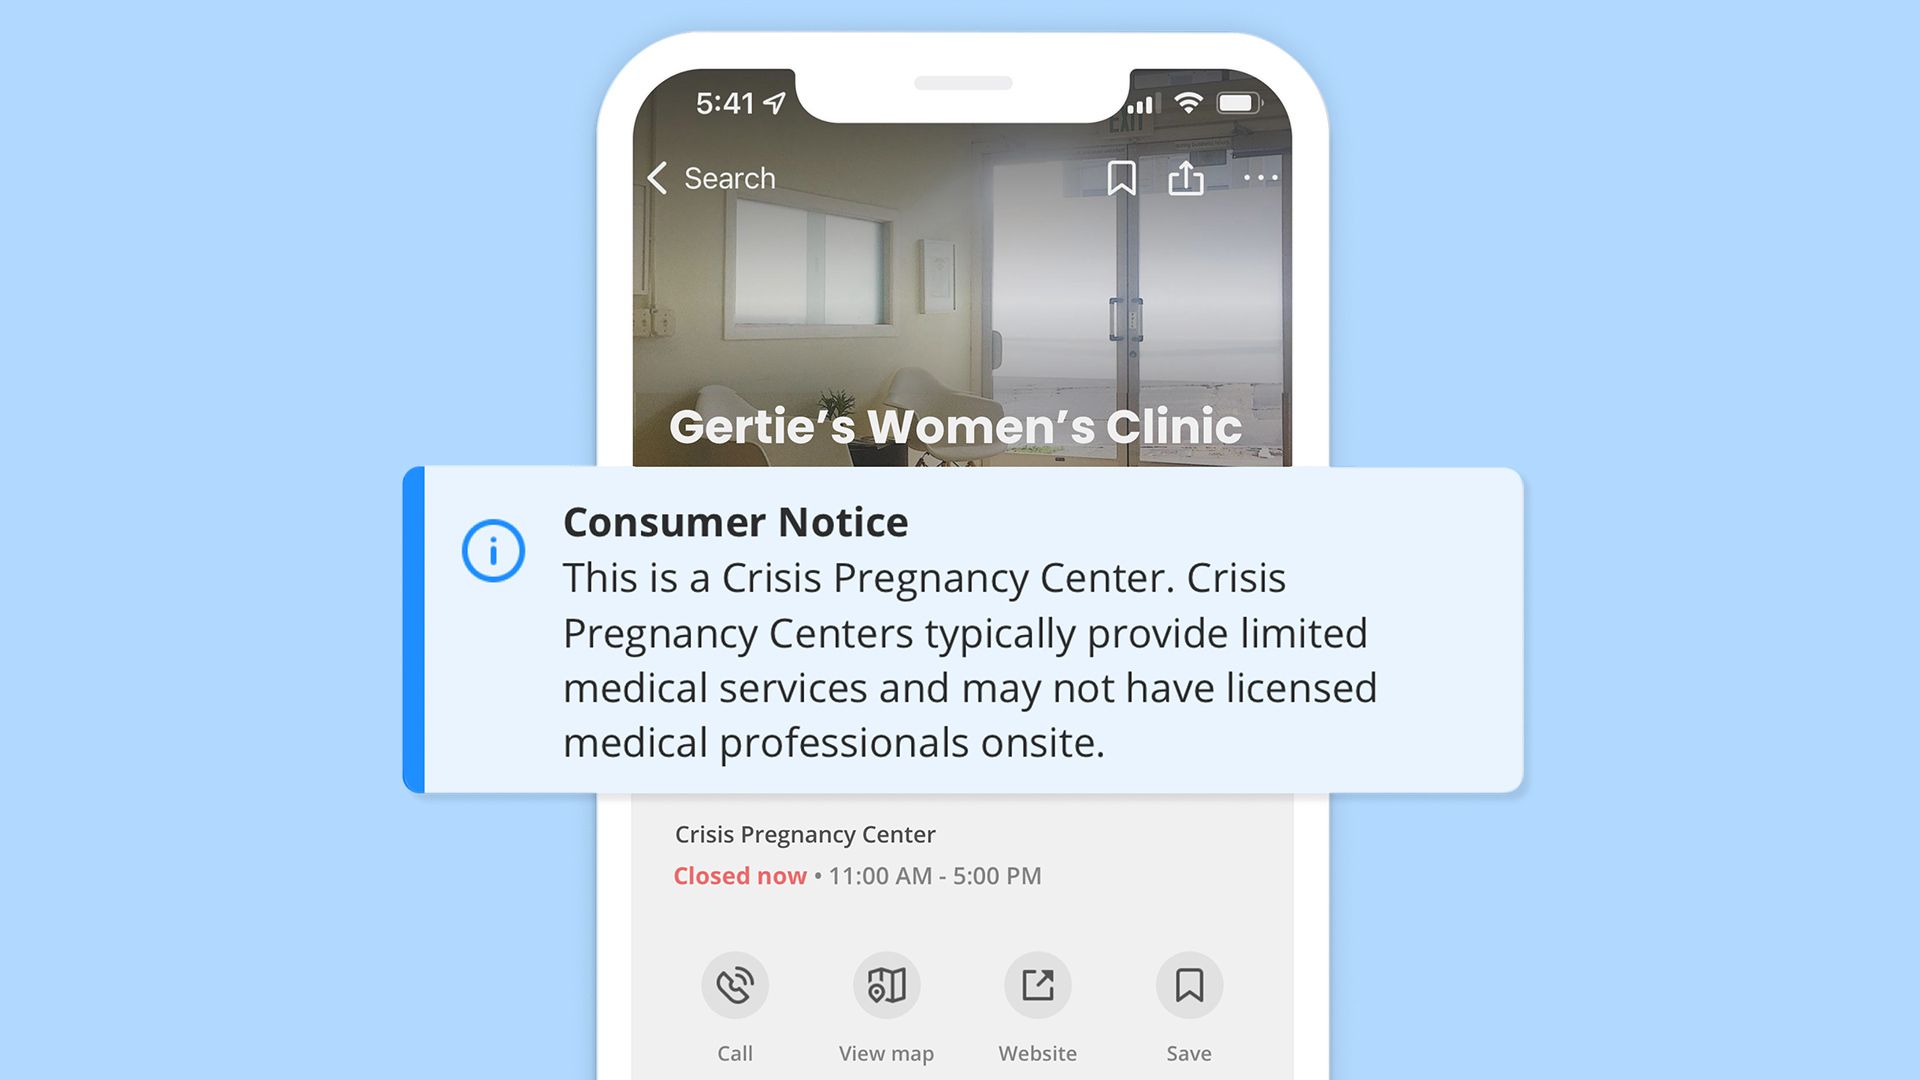 An image of new labeling by Yelp to more clearly distinguish crisis pregnancy centers from clinics that provide abortions.